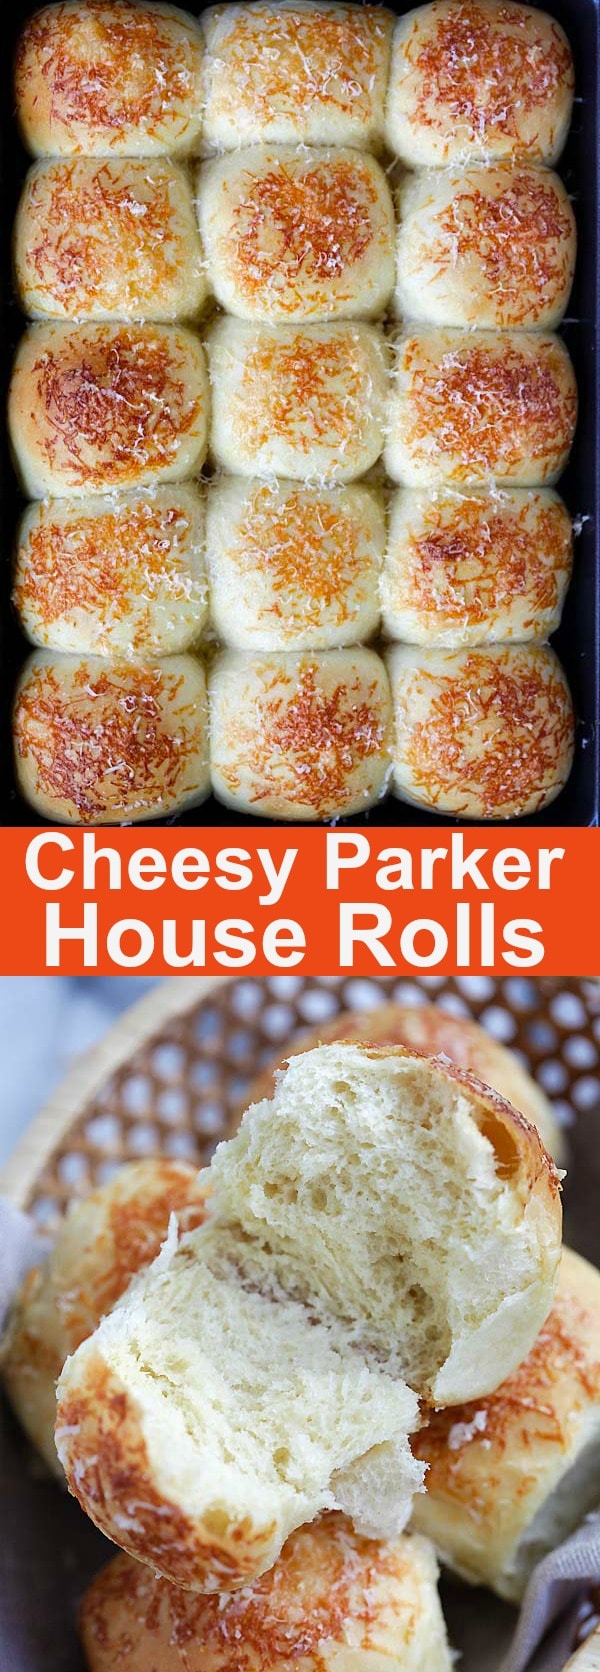 Cheesy Parker House Rolls – BEST Parker house rolls recipe with Parmesan cheese. Easy, fail-proof and yields soft and delicious homemade rolls | rasamalaysia.com